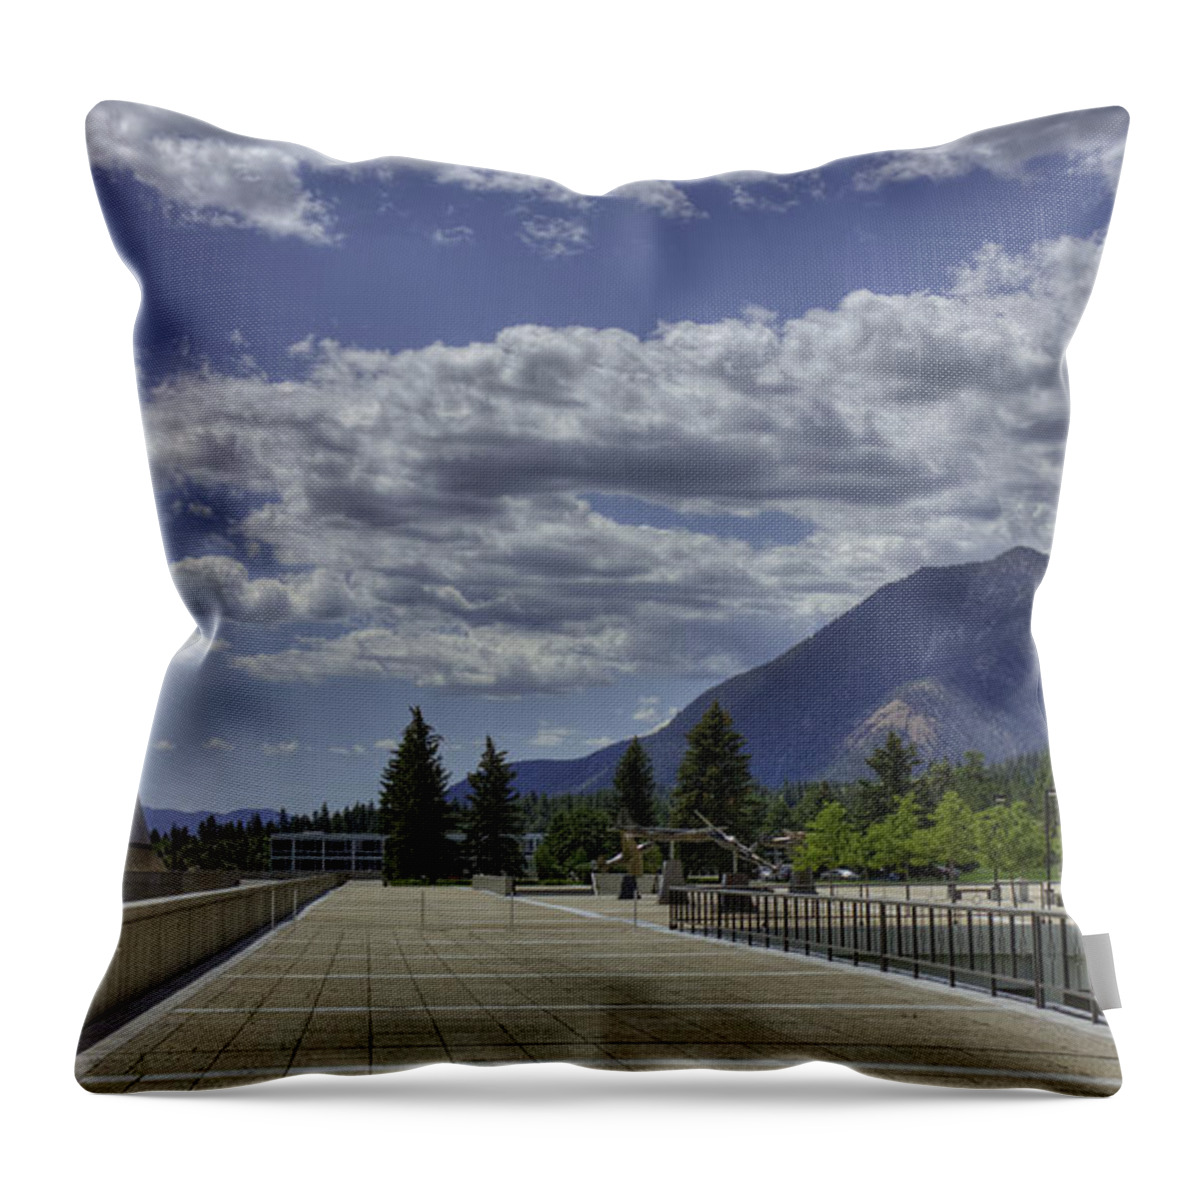 United States Air Force Academy Throw Pillow featuring the photograph Seventeen Spires by David Bearden